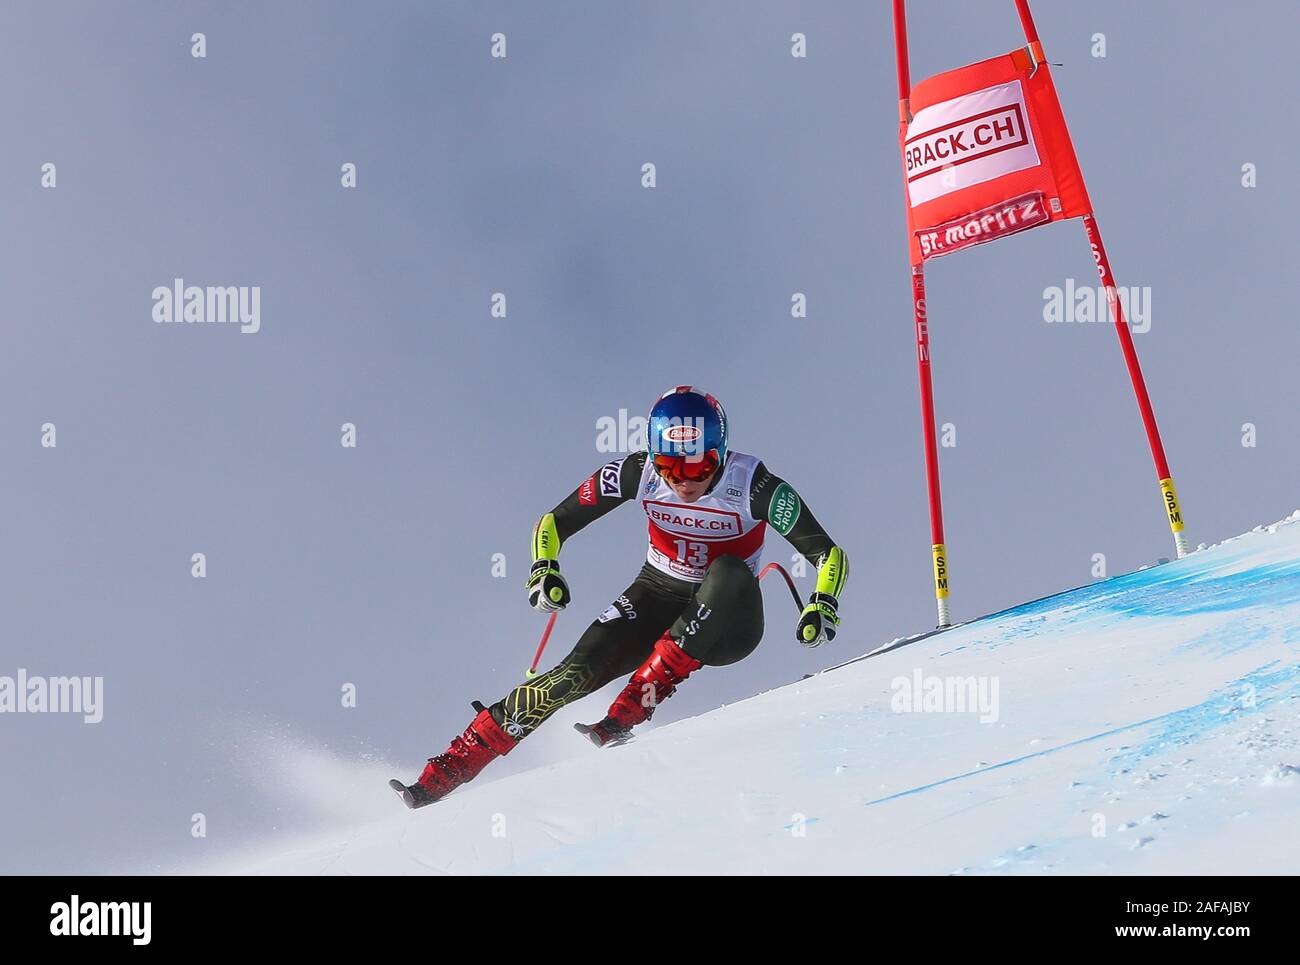 Mikaela Shiffrin 2019 High Resolution Stock Photography and Images - Alamy